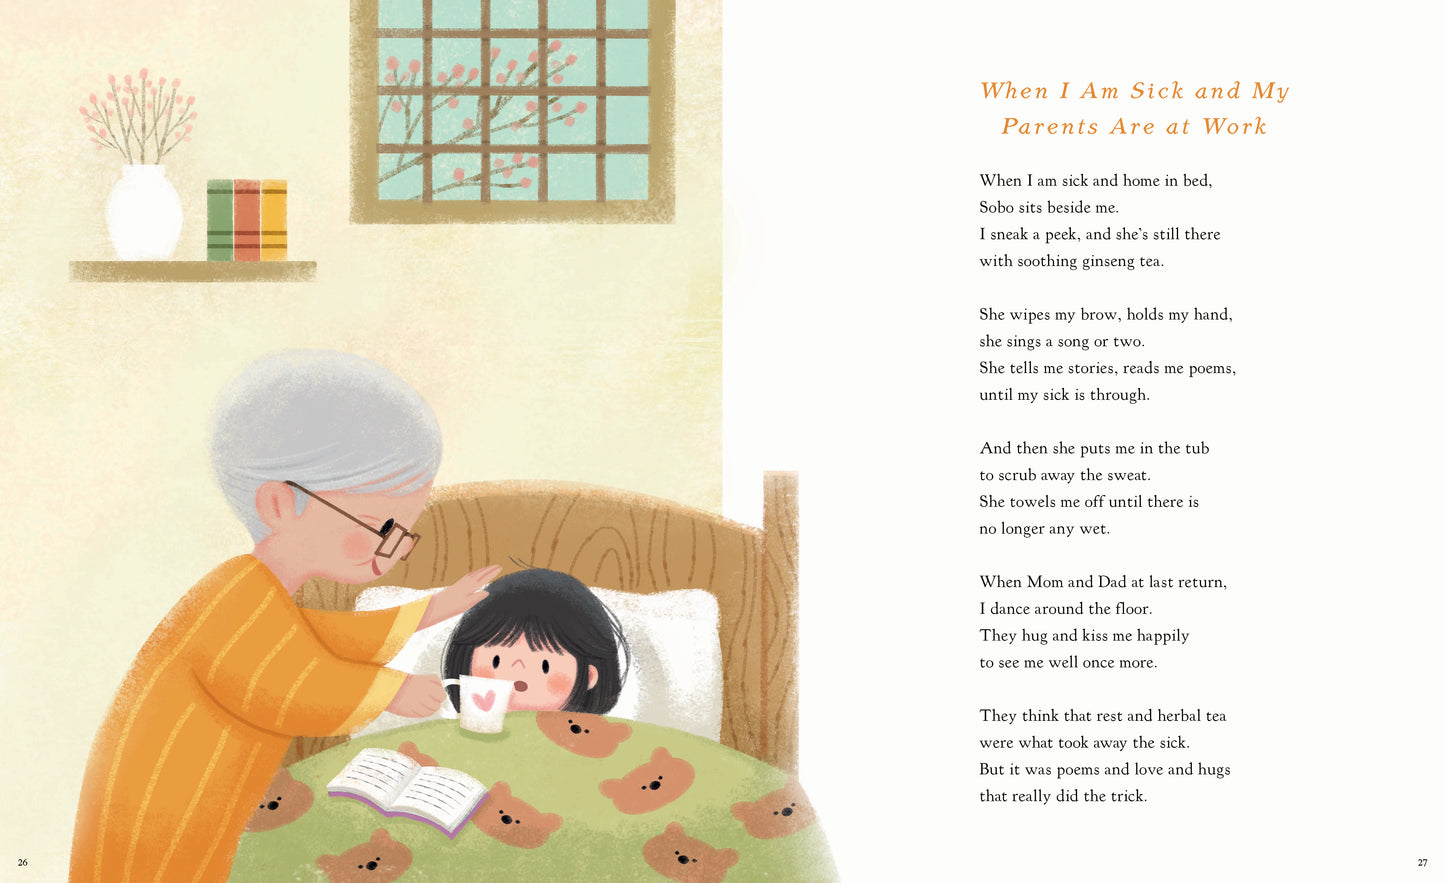 Nana and Me: Special Poems Just for Us